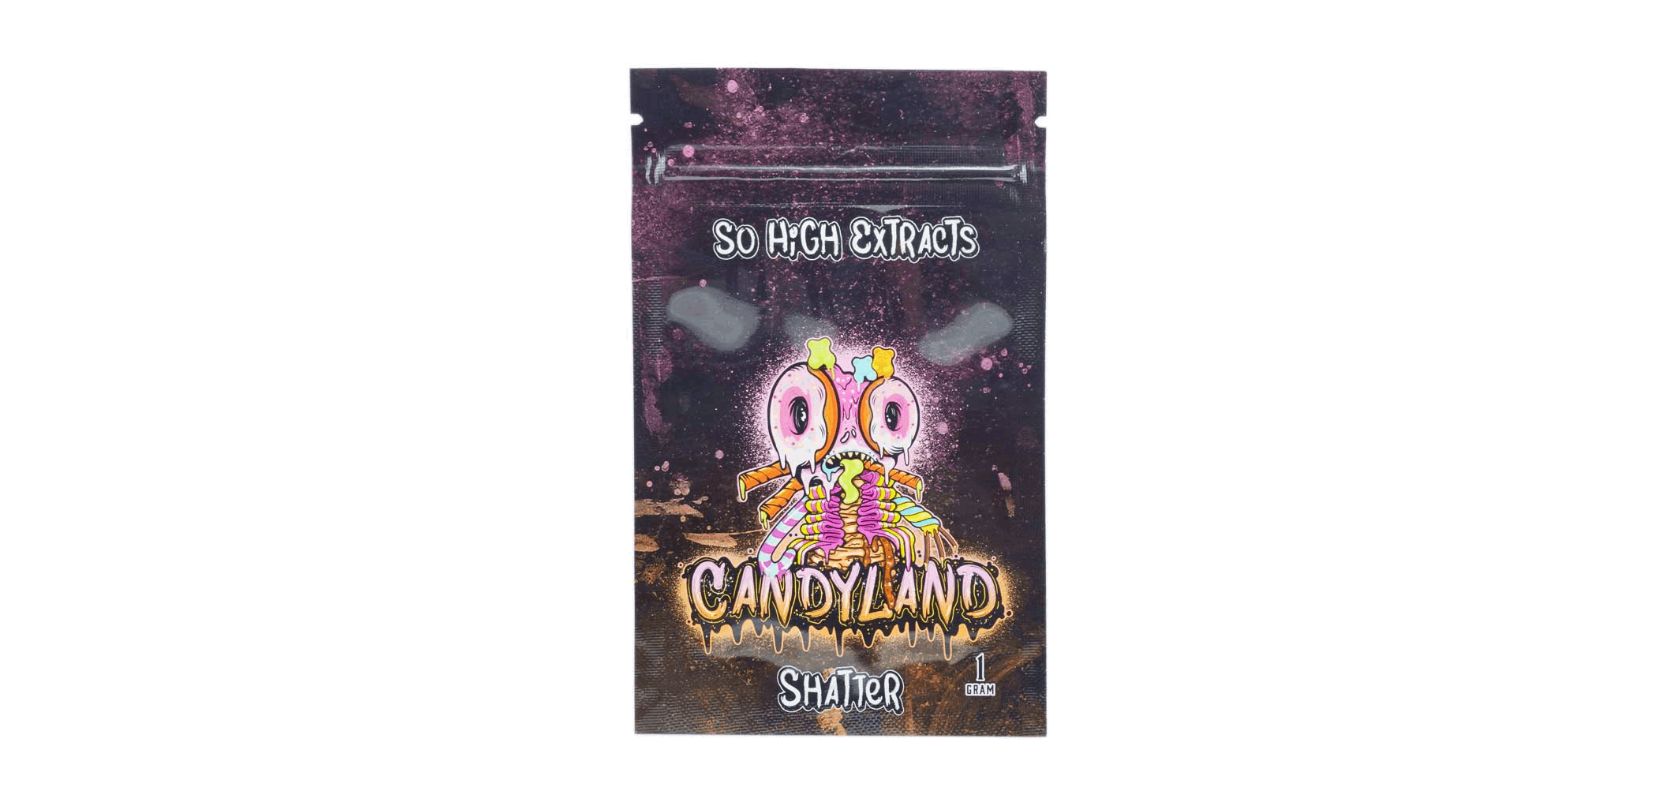 Candy Land Premium Shatter is a sativa hybrid bred from Bay Platinum Cookies and Granddaddy Purple strains.